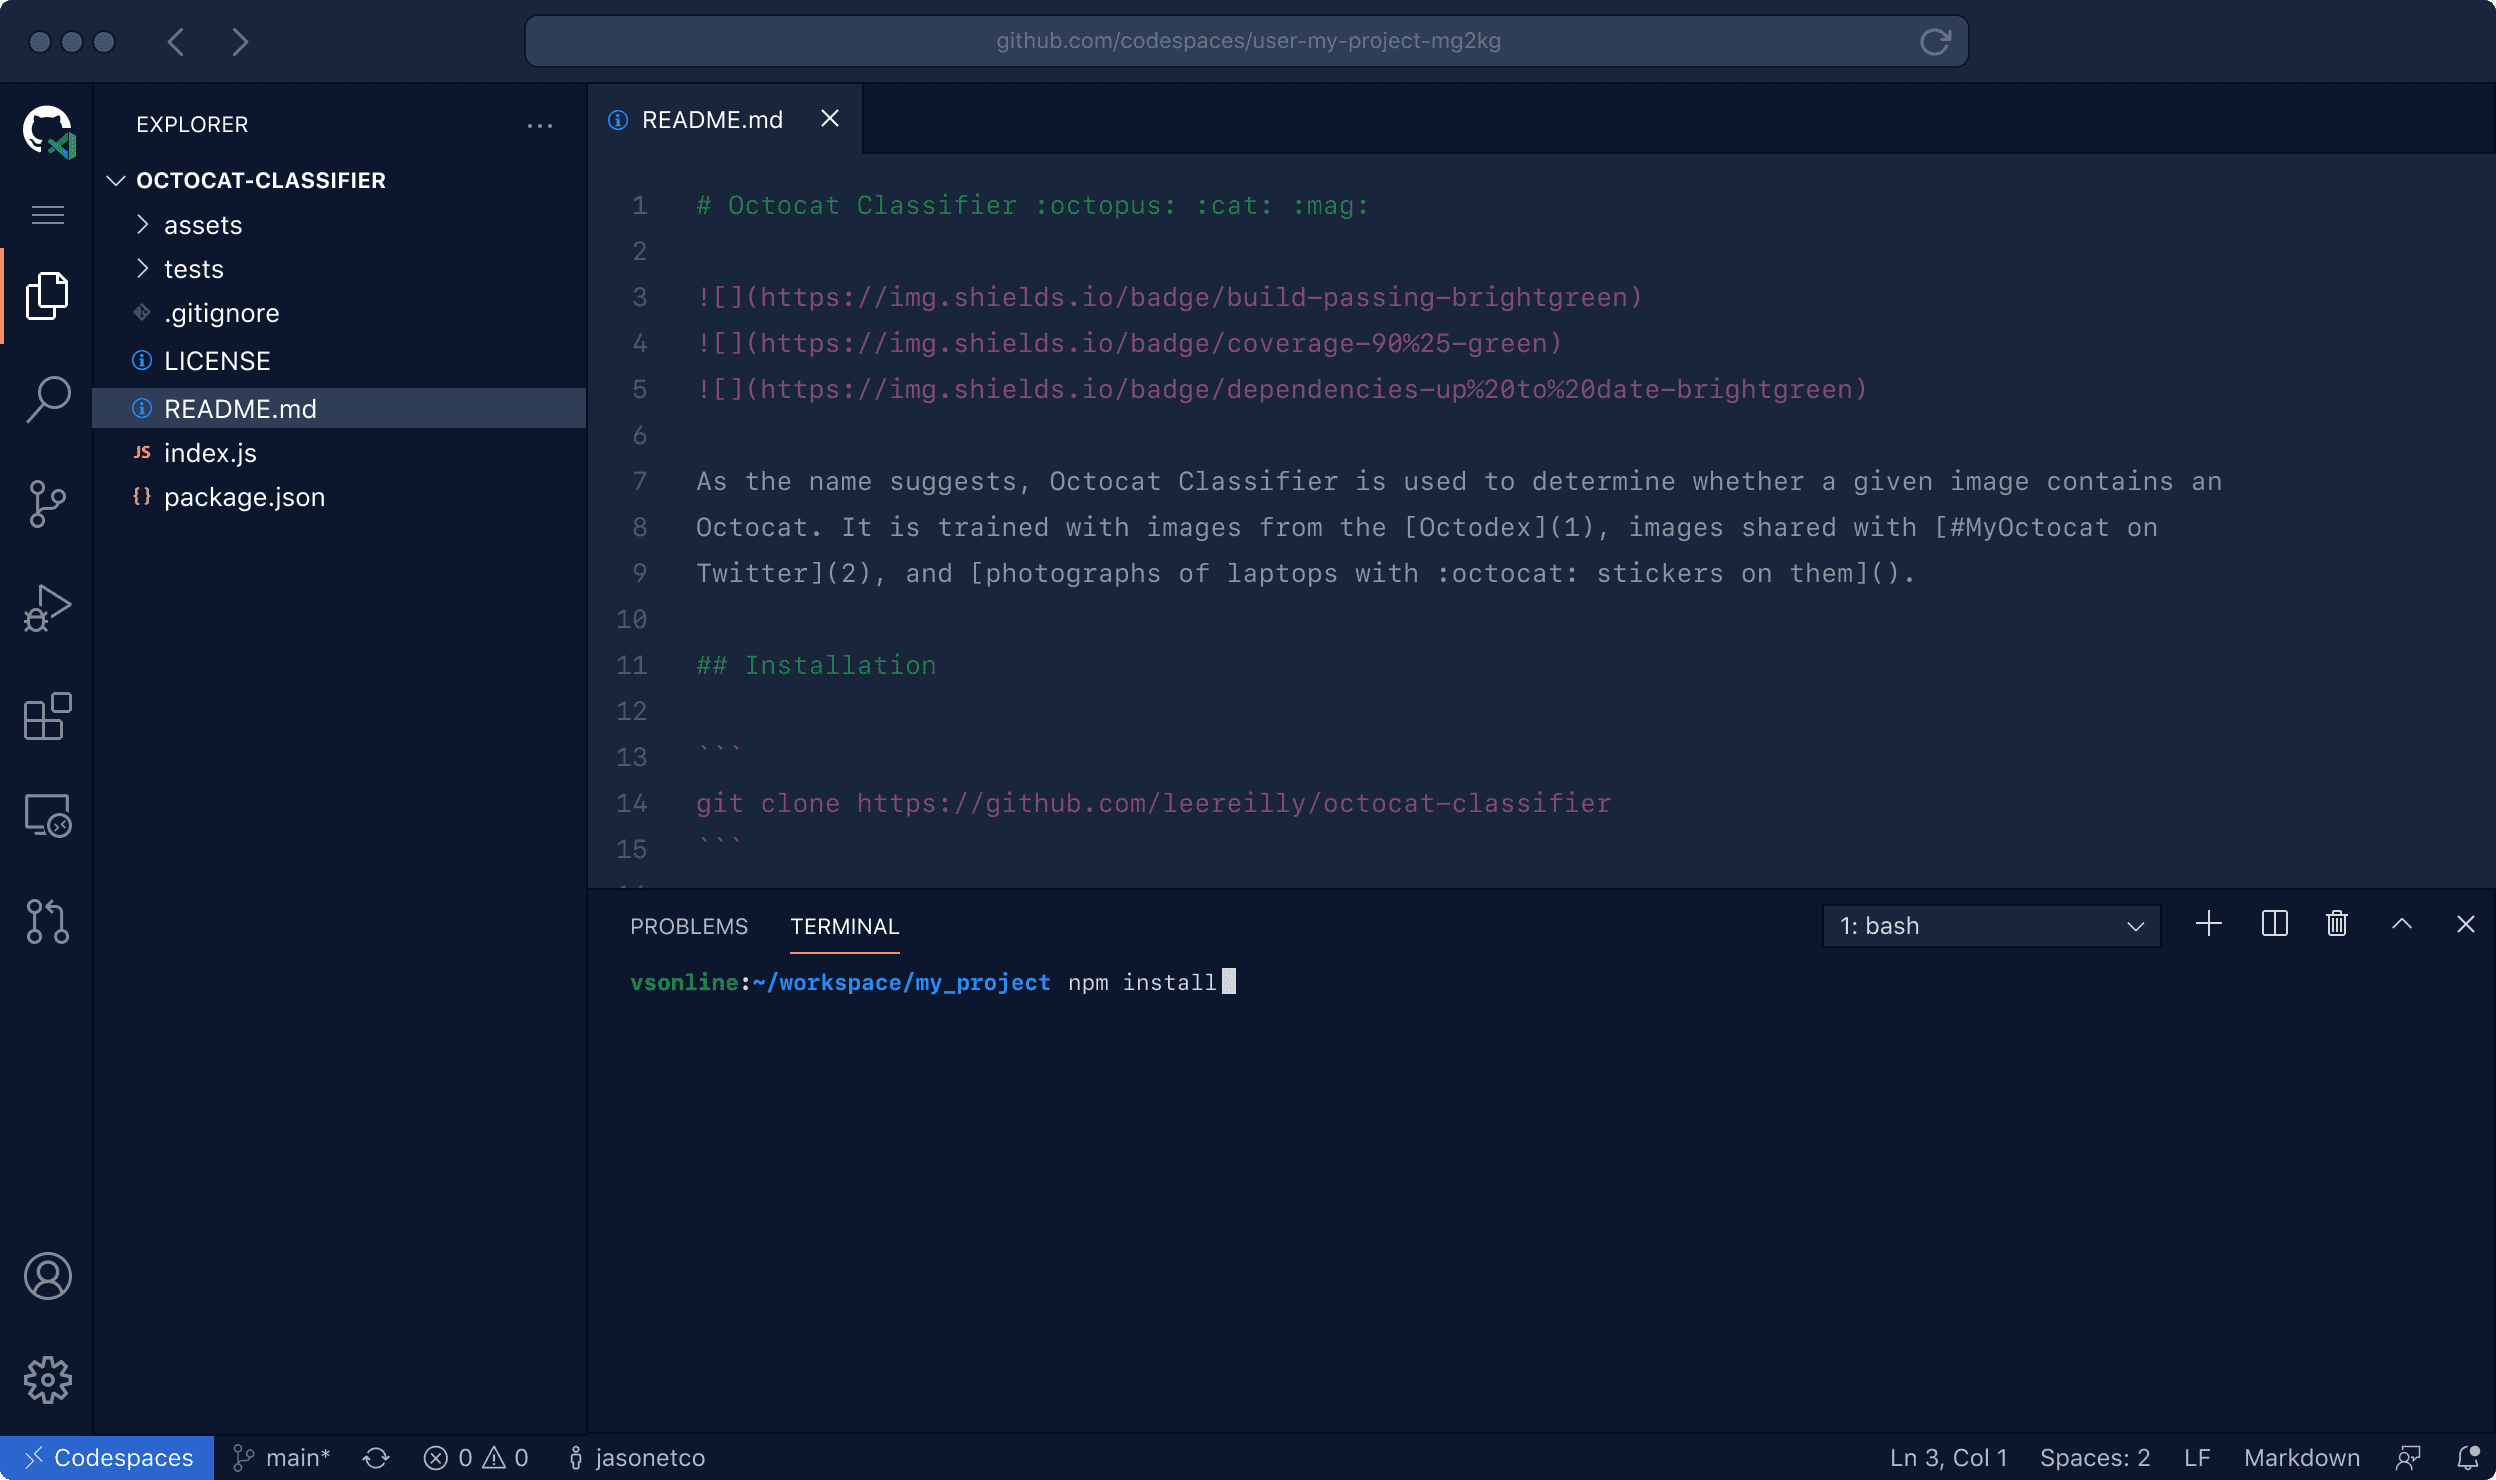 VS Code running in the browser with your project's code and development environment running. A terminal panel is visiable in the editor.